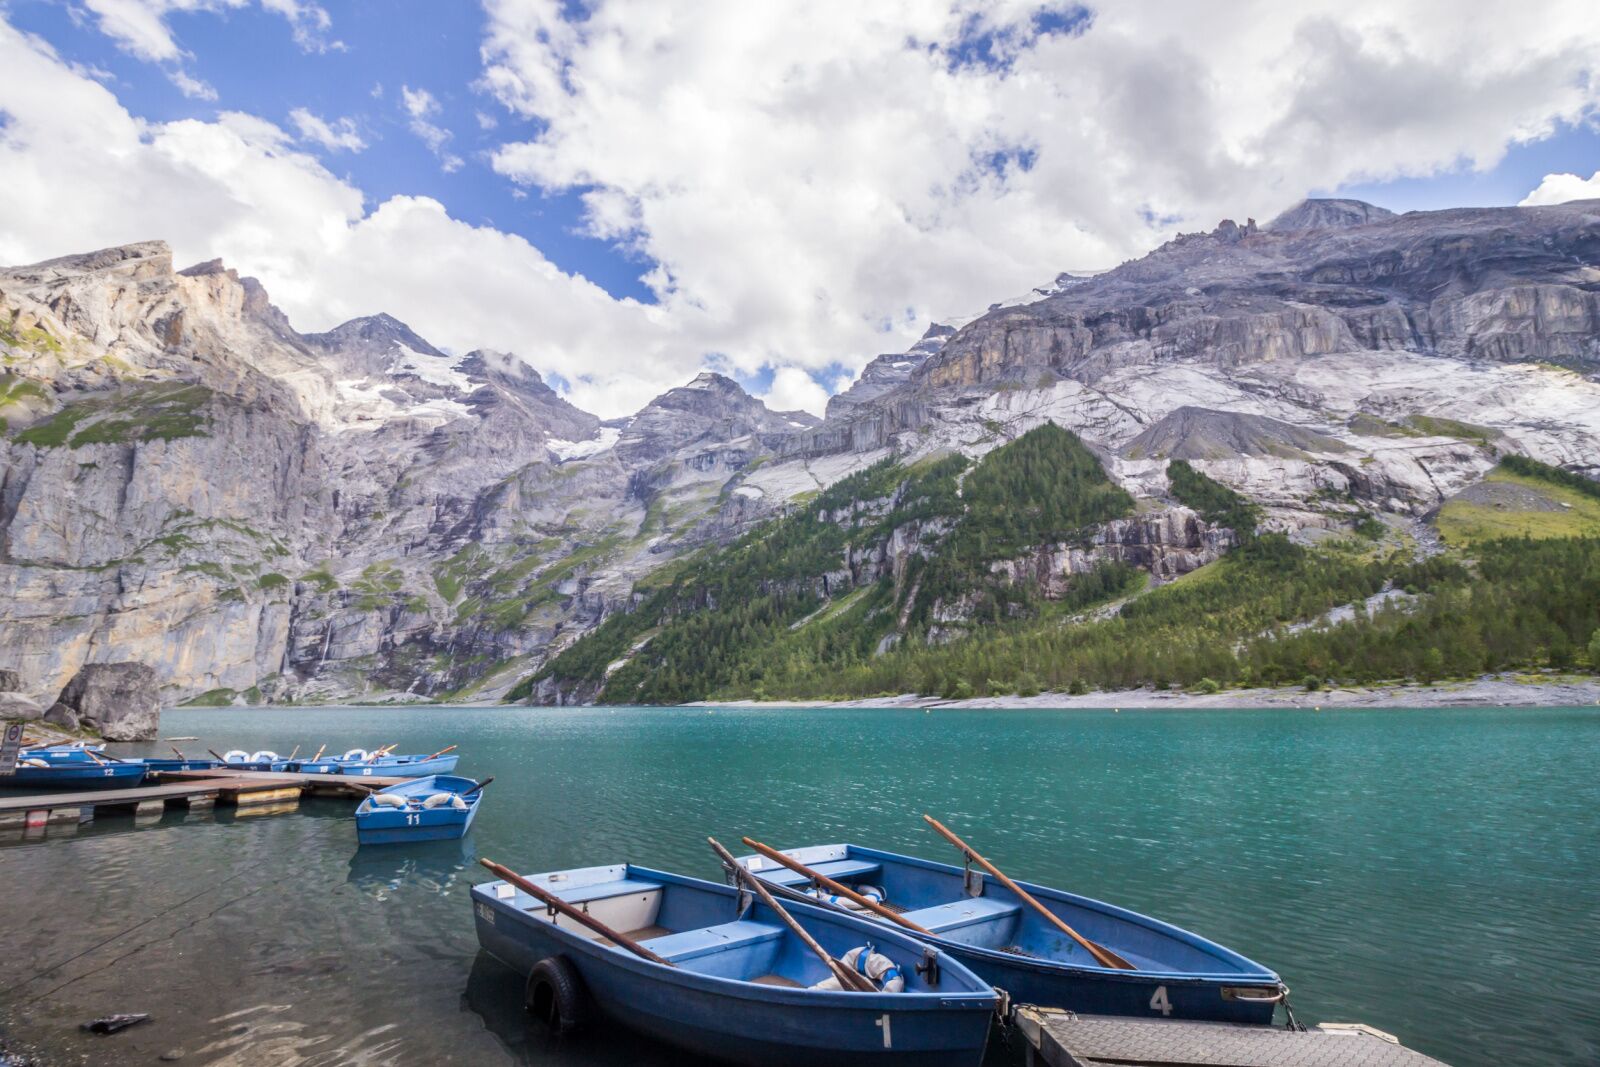 boats on the water at Oeschinen Lake